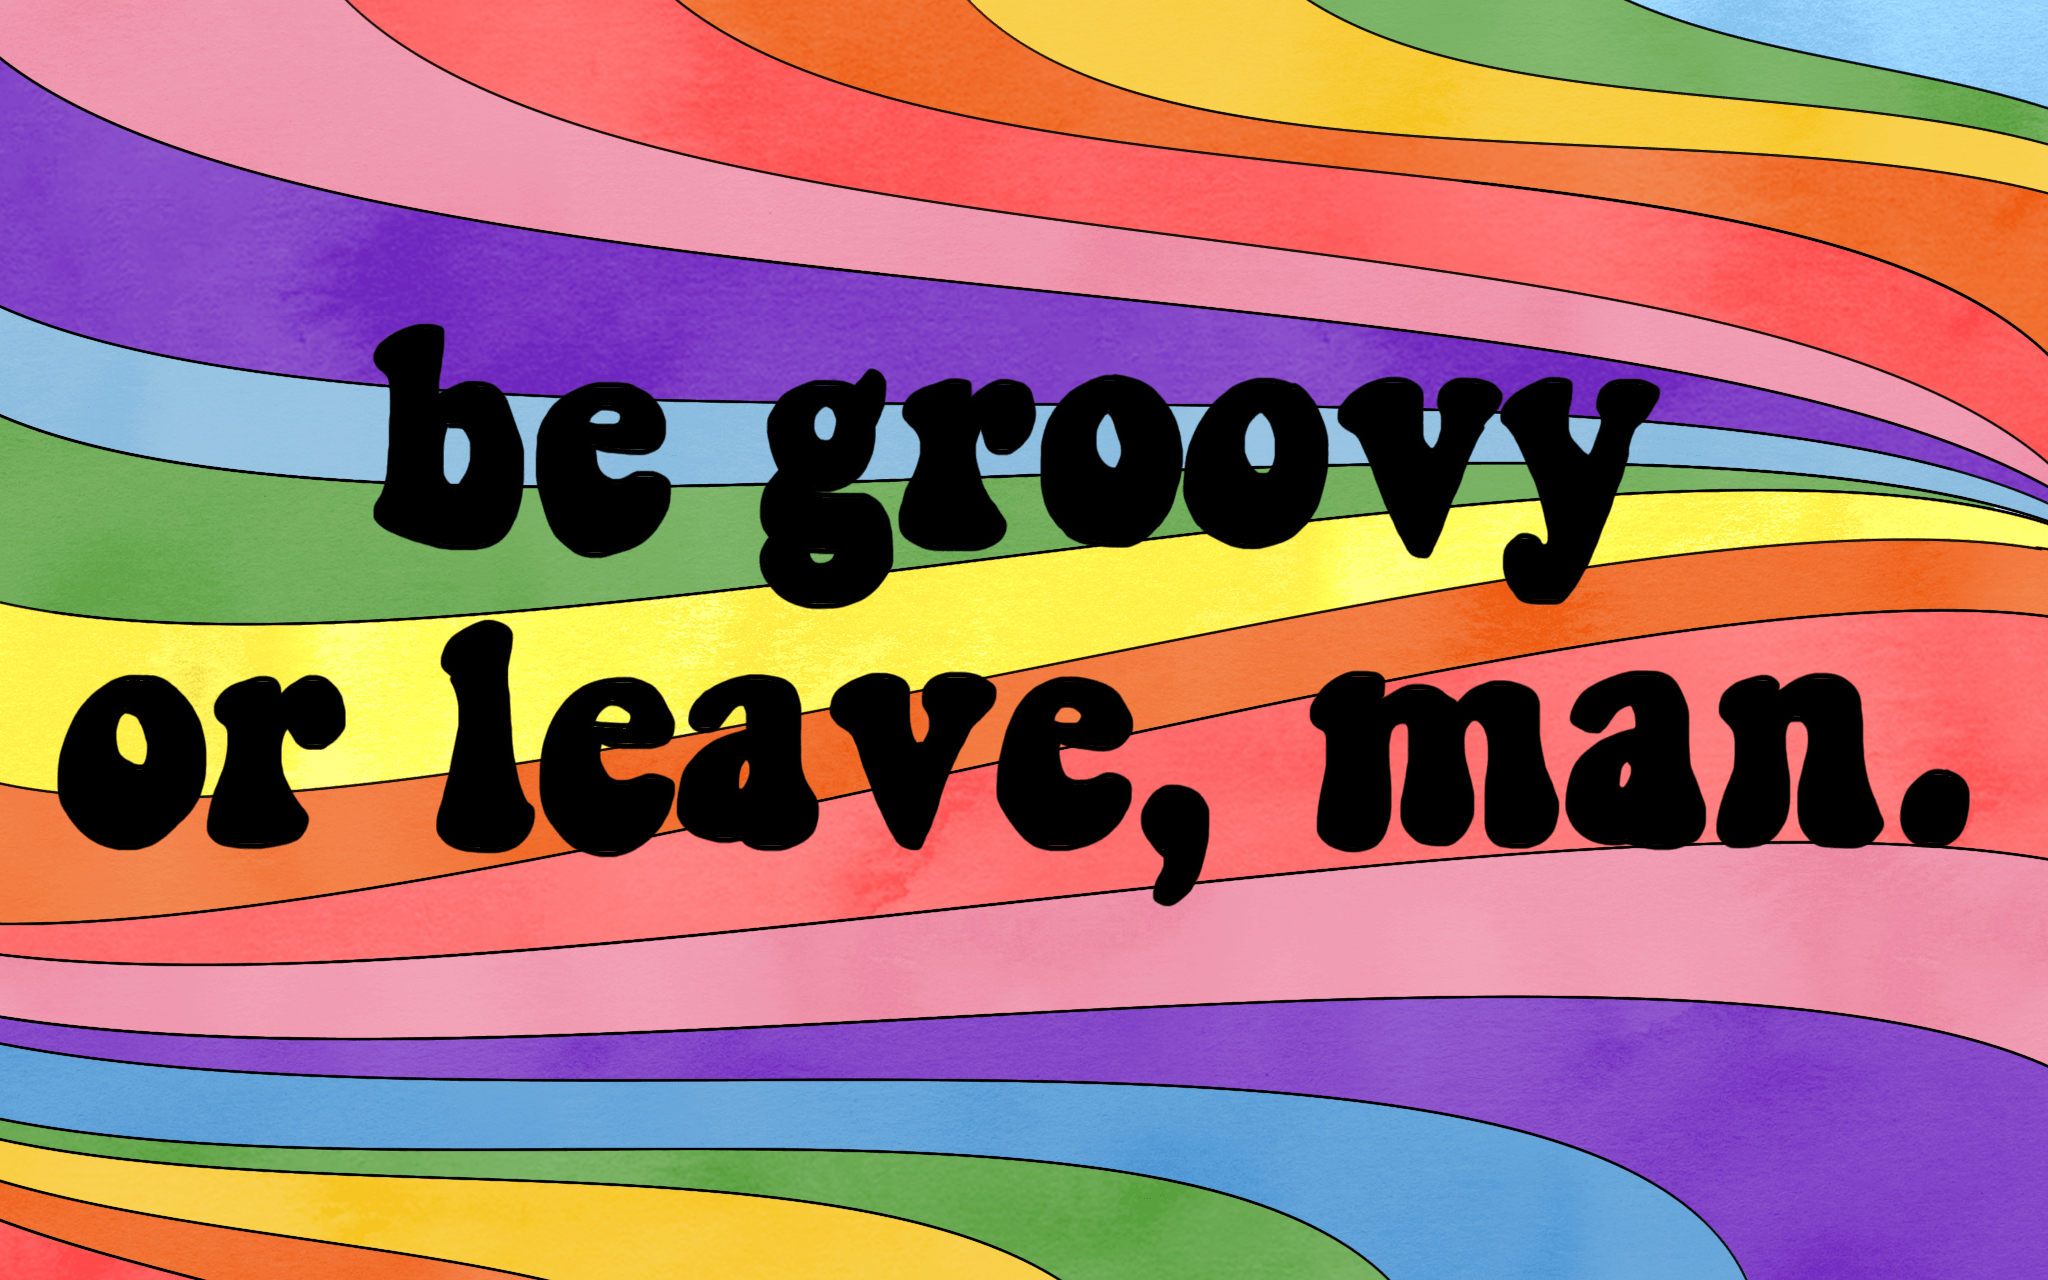 A rainbow colored poster that says be groovy or leave, man - 70s